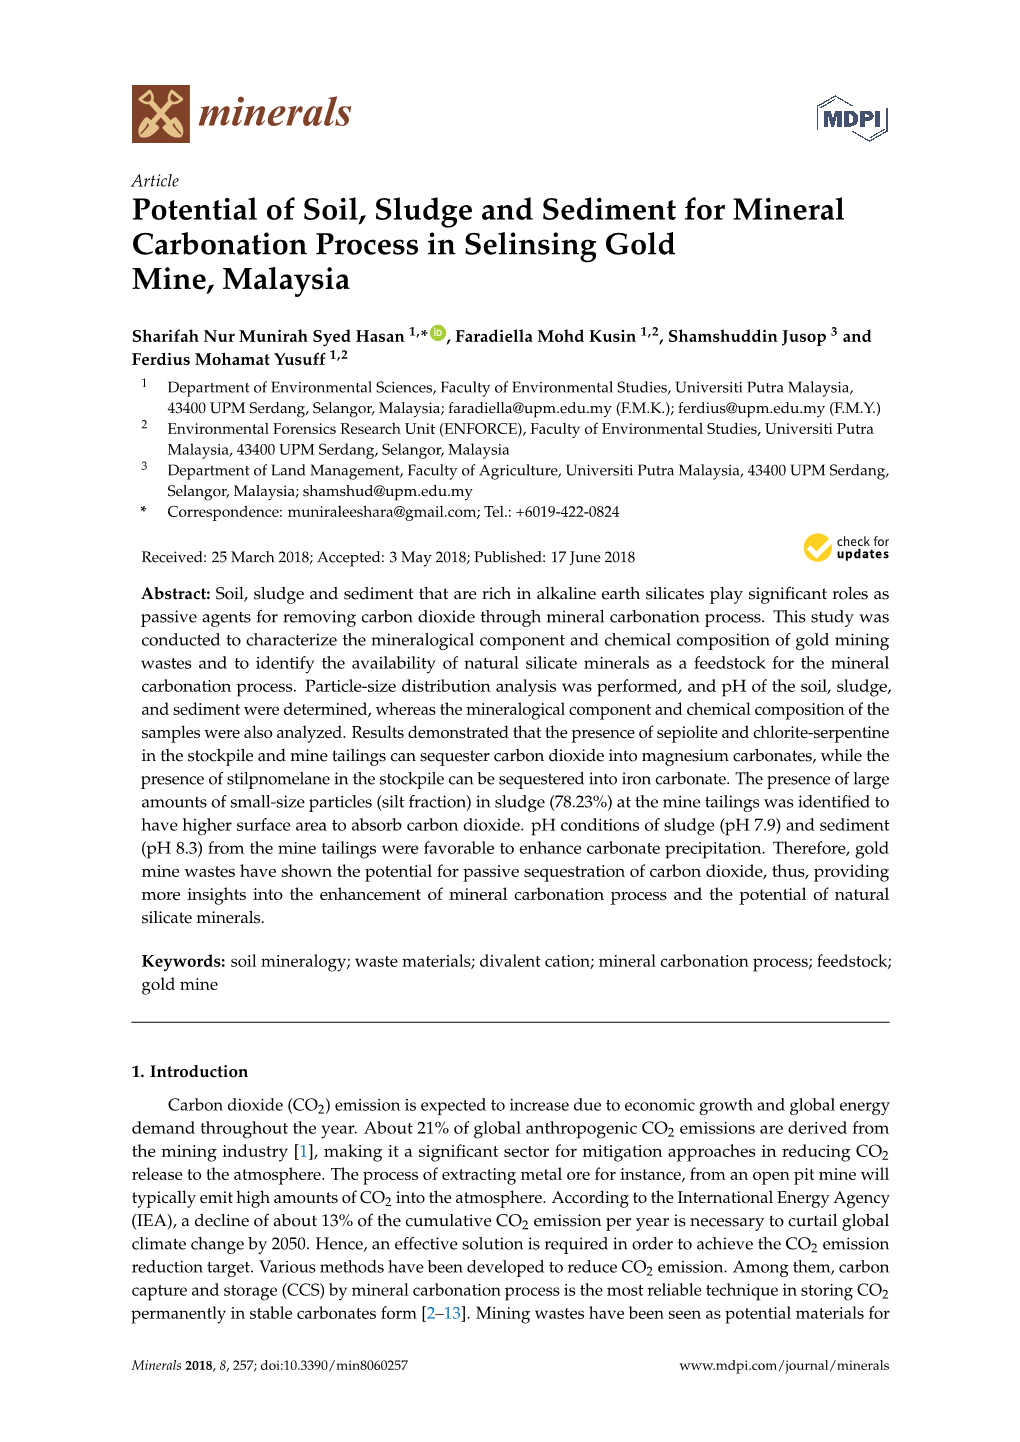 Potential of Soil, Sludge and Sediment for Mineral Carbonation Process in Selinsing Gold Mine, Malaysia